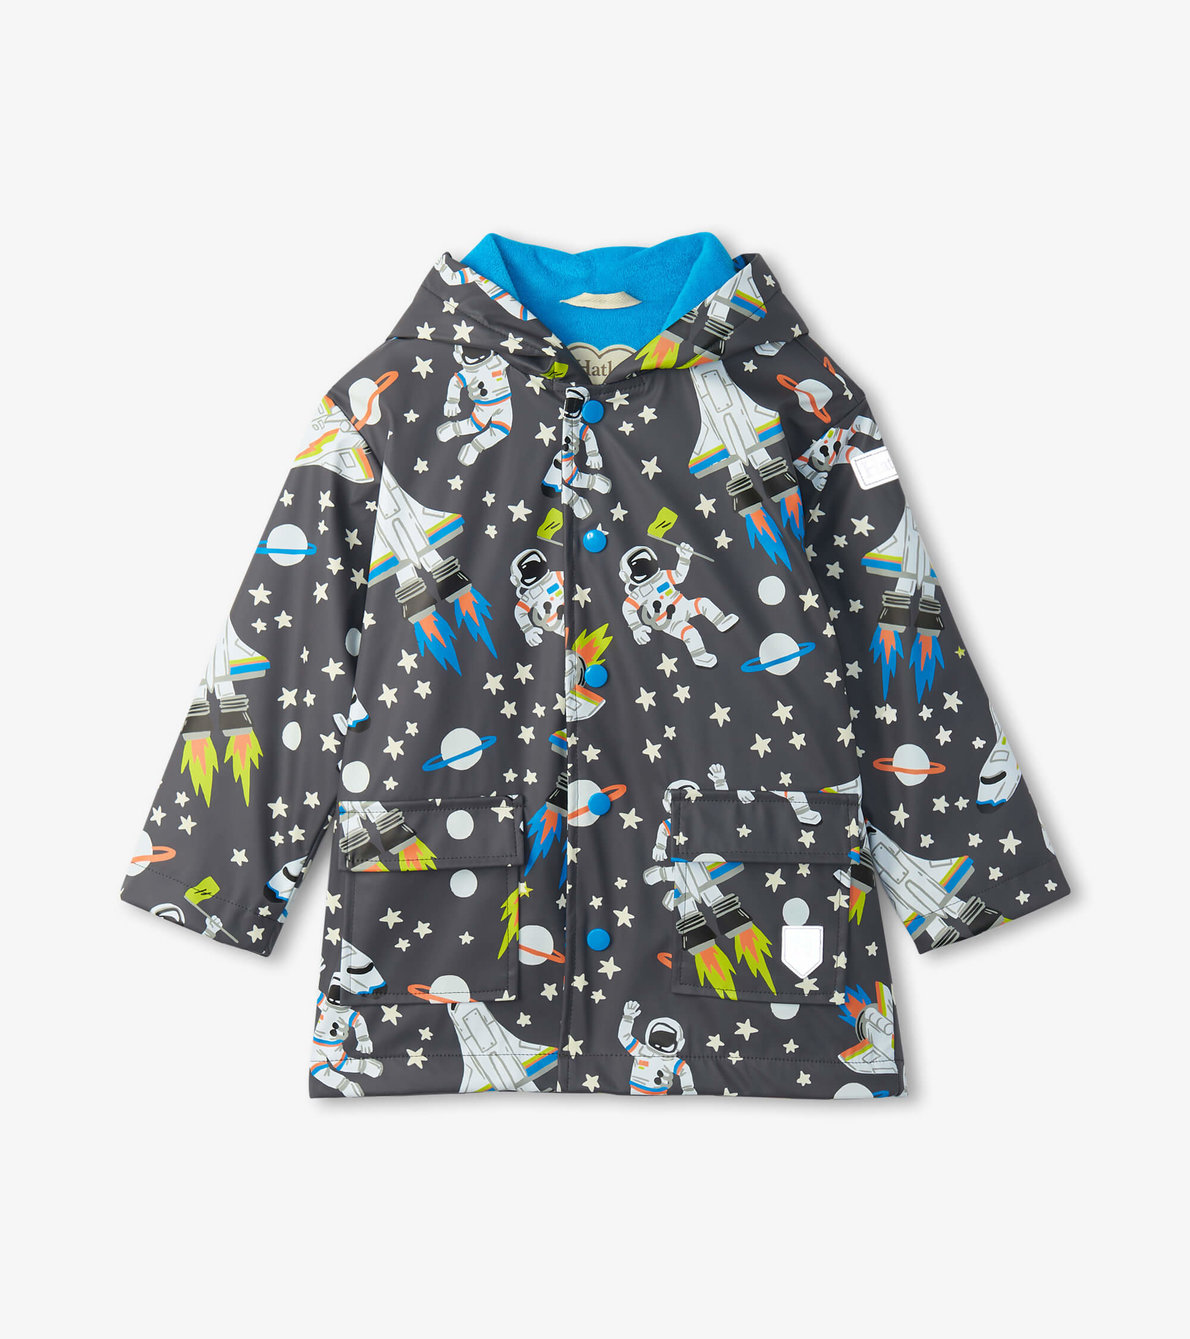 View larger image of Boys Astronaut Button-Up Raincoat